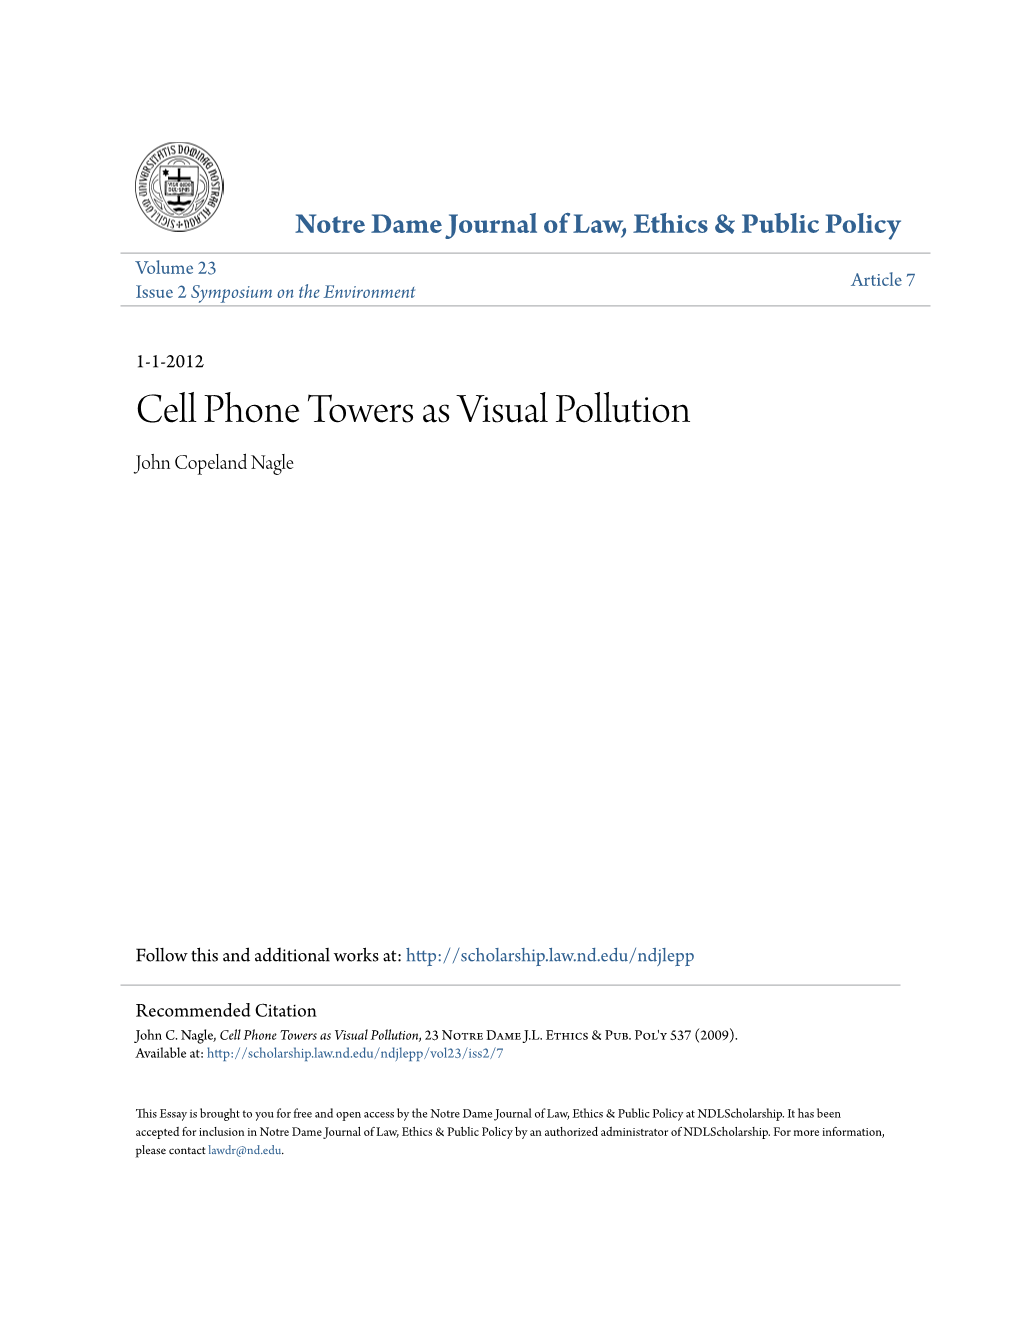 Cell Phone Towers As Visual Pollution John Copeland Nagle